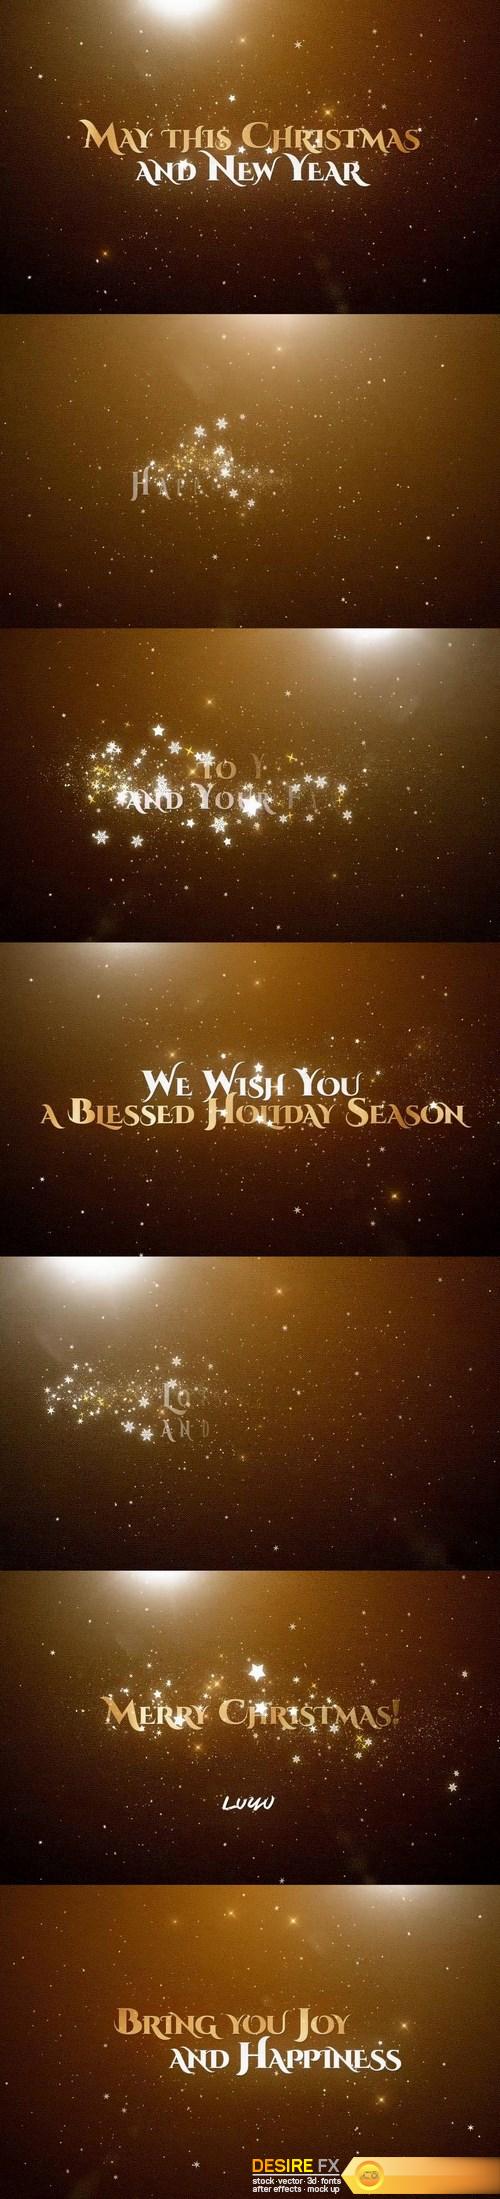 motion-array-christmas-wishes-51812